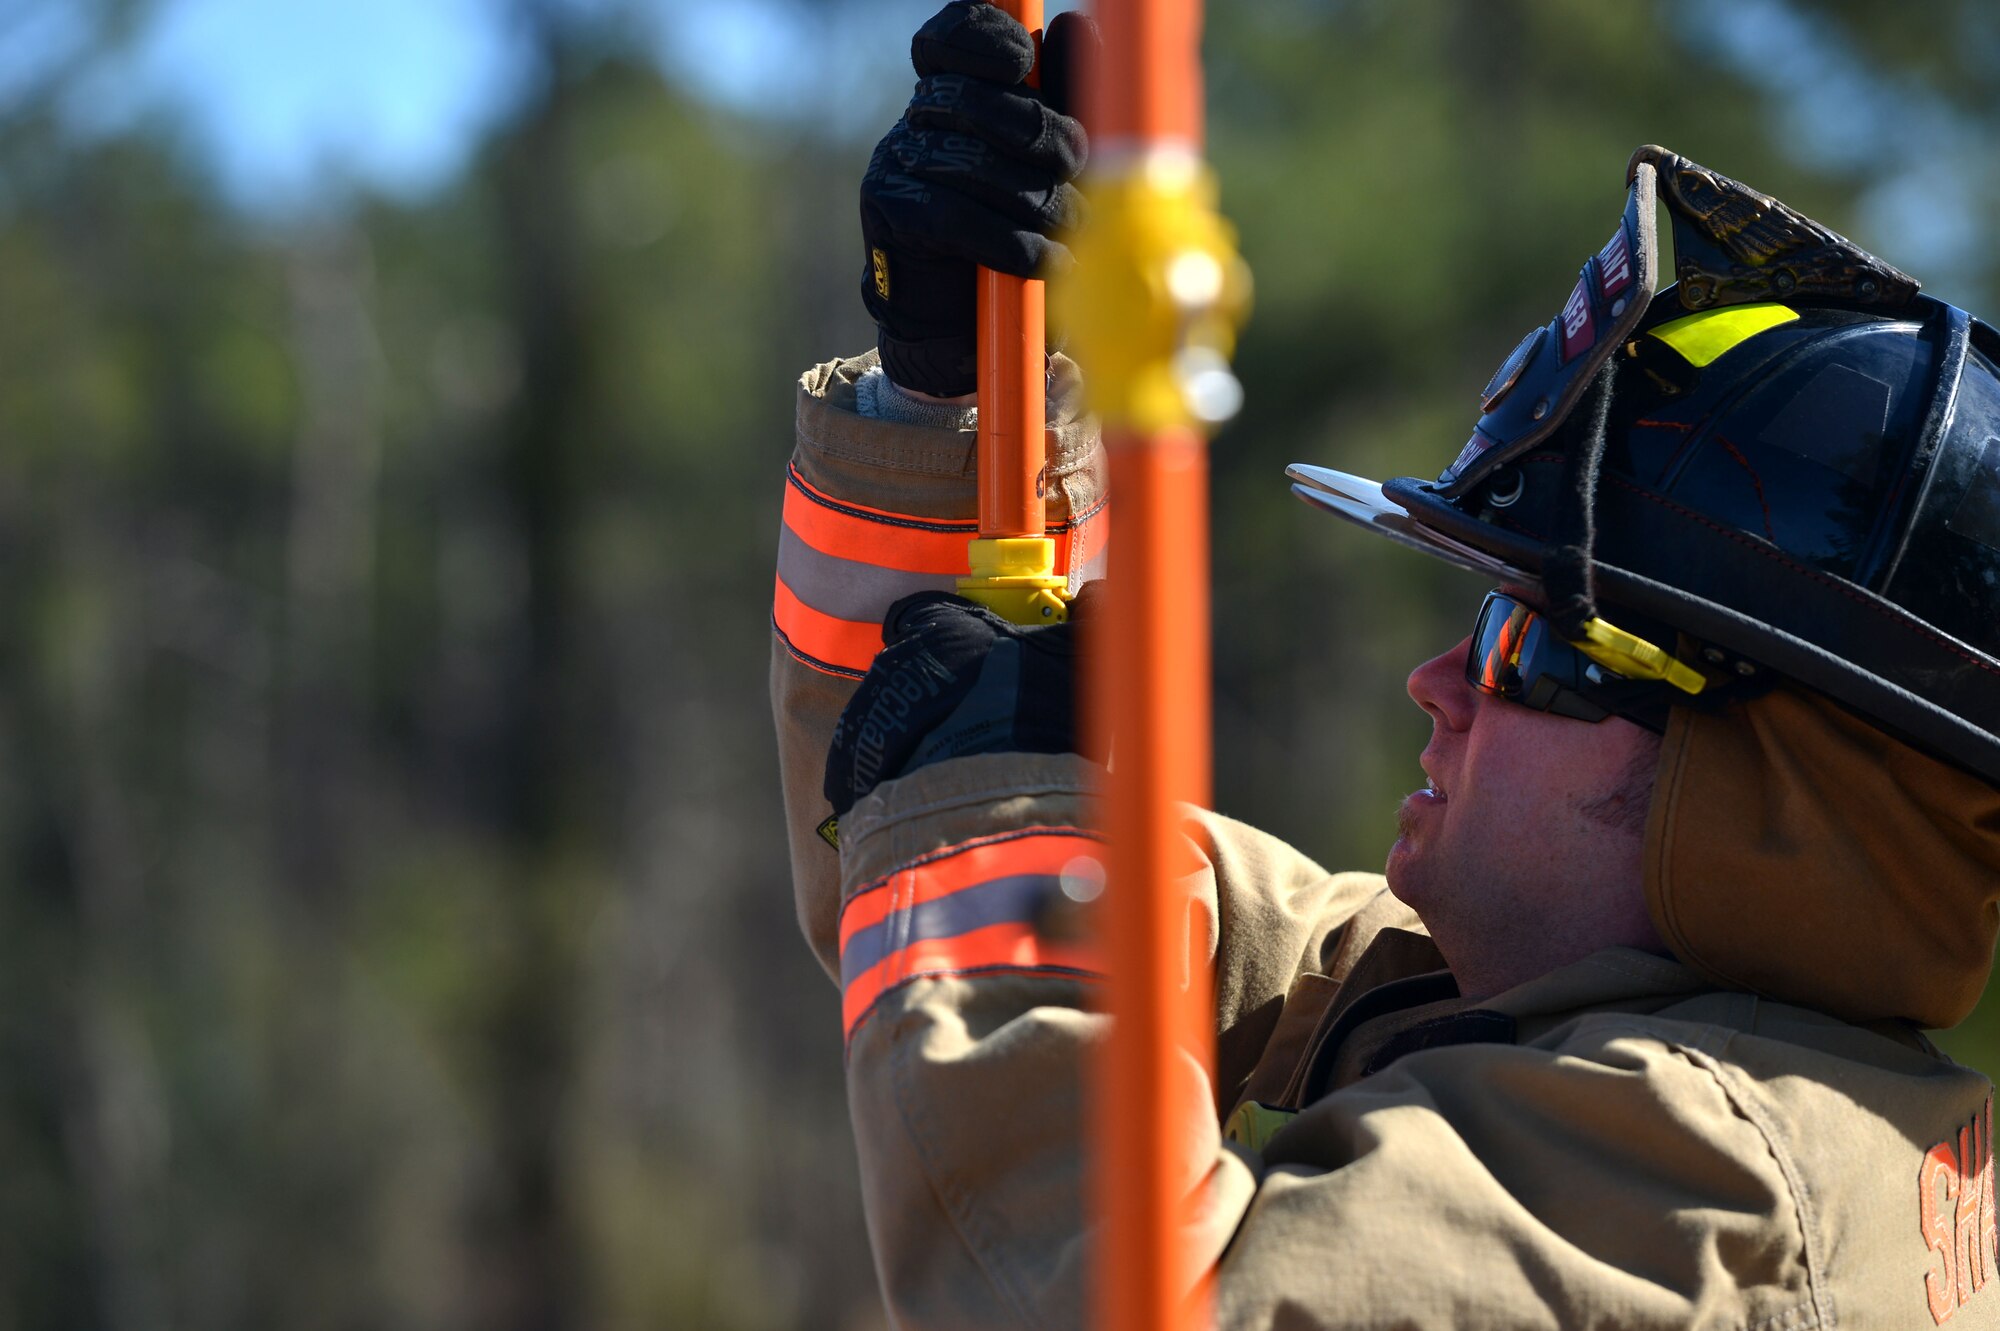 Wayne Brugh, 20th Civil Engineer Squadron fire department driver and operator, assembles a decontamination pool shower pipe during a hazardous material training at Shaw Air Force Base, S.C., Jan. 19, 2017. During the joint exercise, fire fighters were tasked with simulating the decontamination of 20th Aerospace Medicine Squadron bioenvironmental flight Airmen and 20th CES explosive ordnance disposal flight as they exited the simulated chemical spill site. (U.S. Air Force photo by Airman 1st Class Christopher Maldonado)